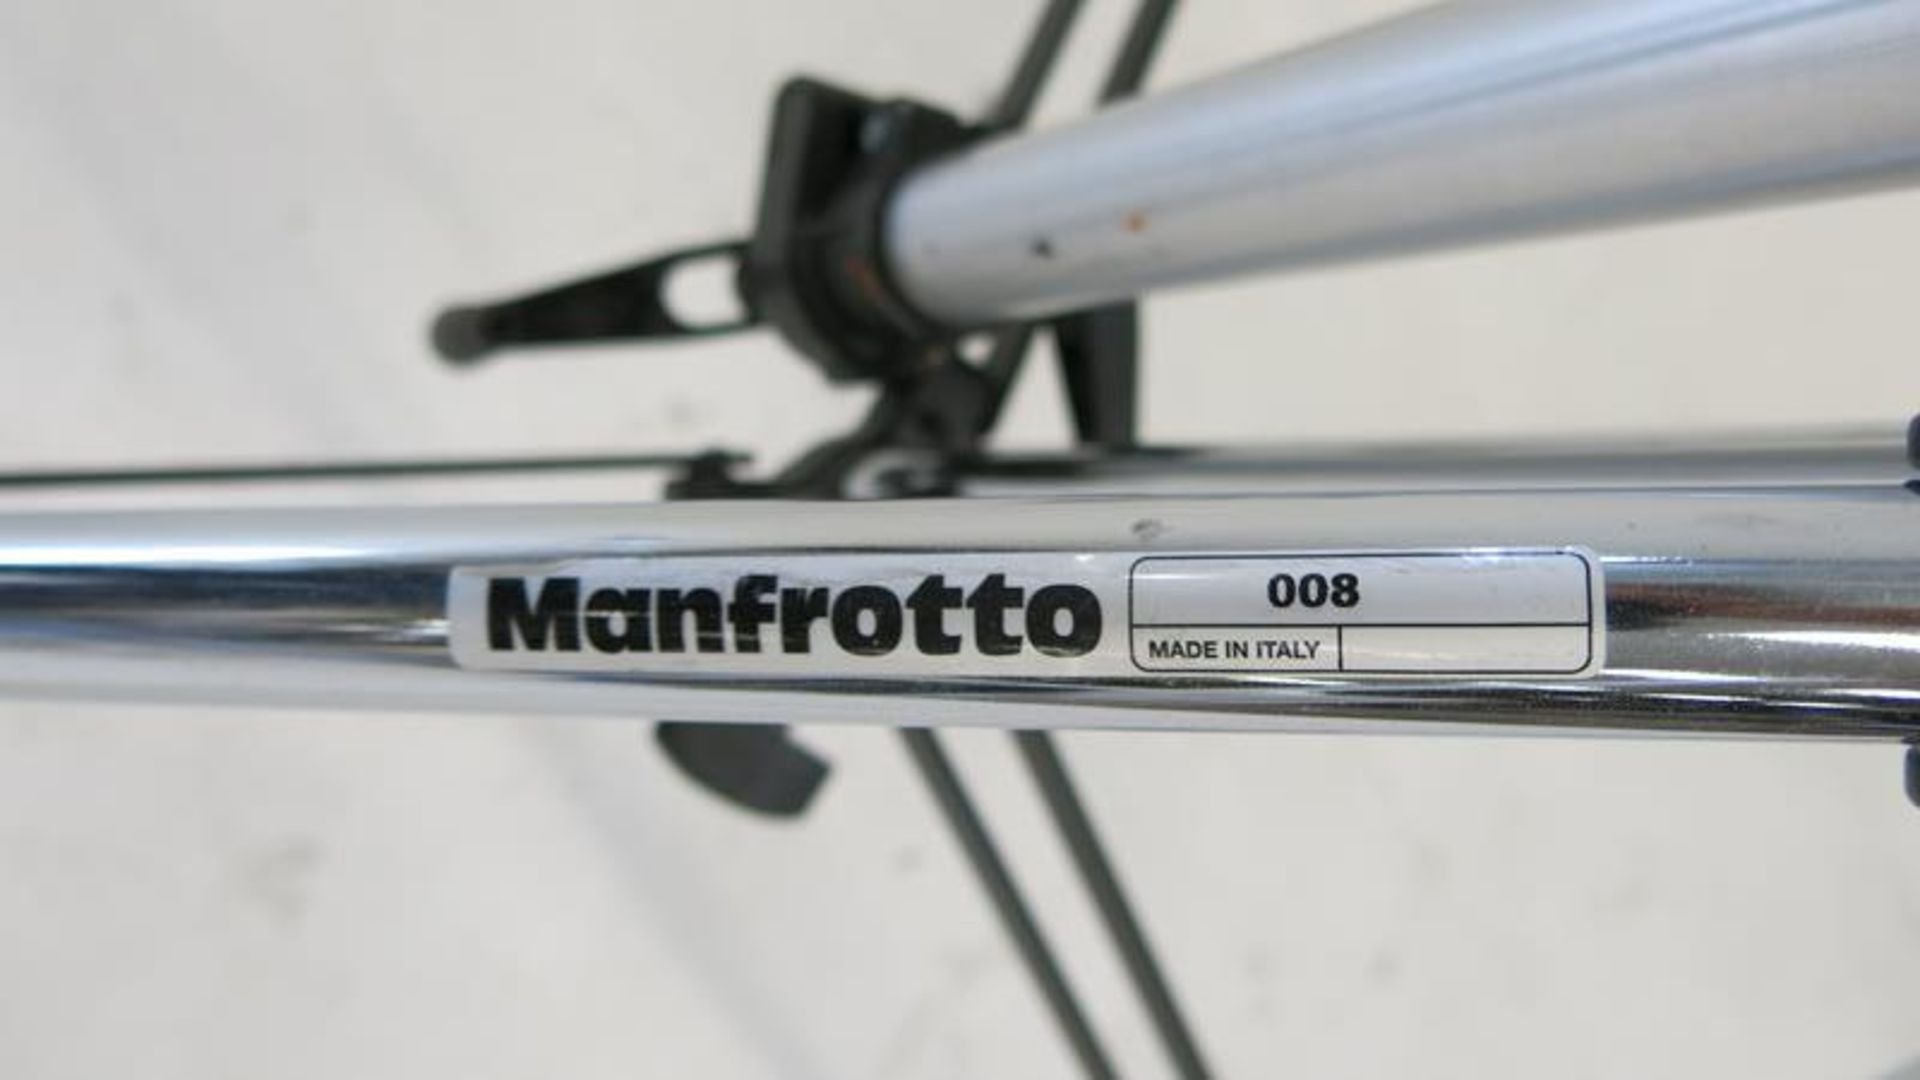 MANFROTTO, 025B, SUPERBOOM WITH MANFROTTO 008, ADJUSTABLE STAND - Image 2 of 2